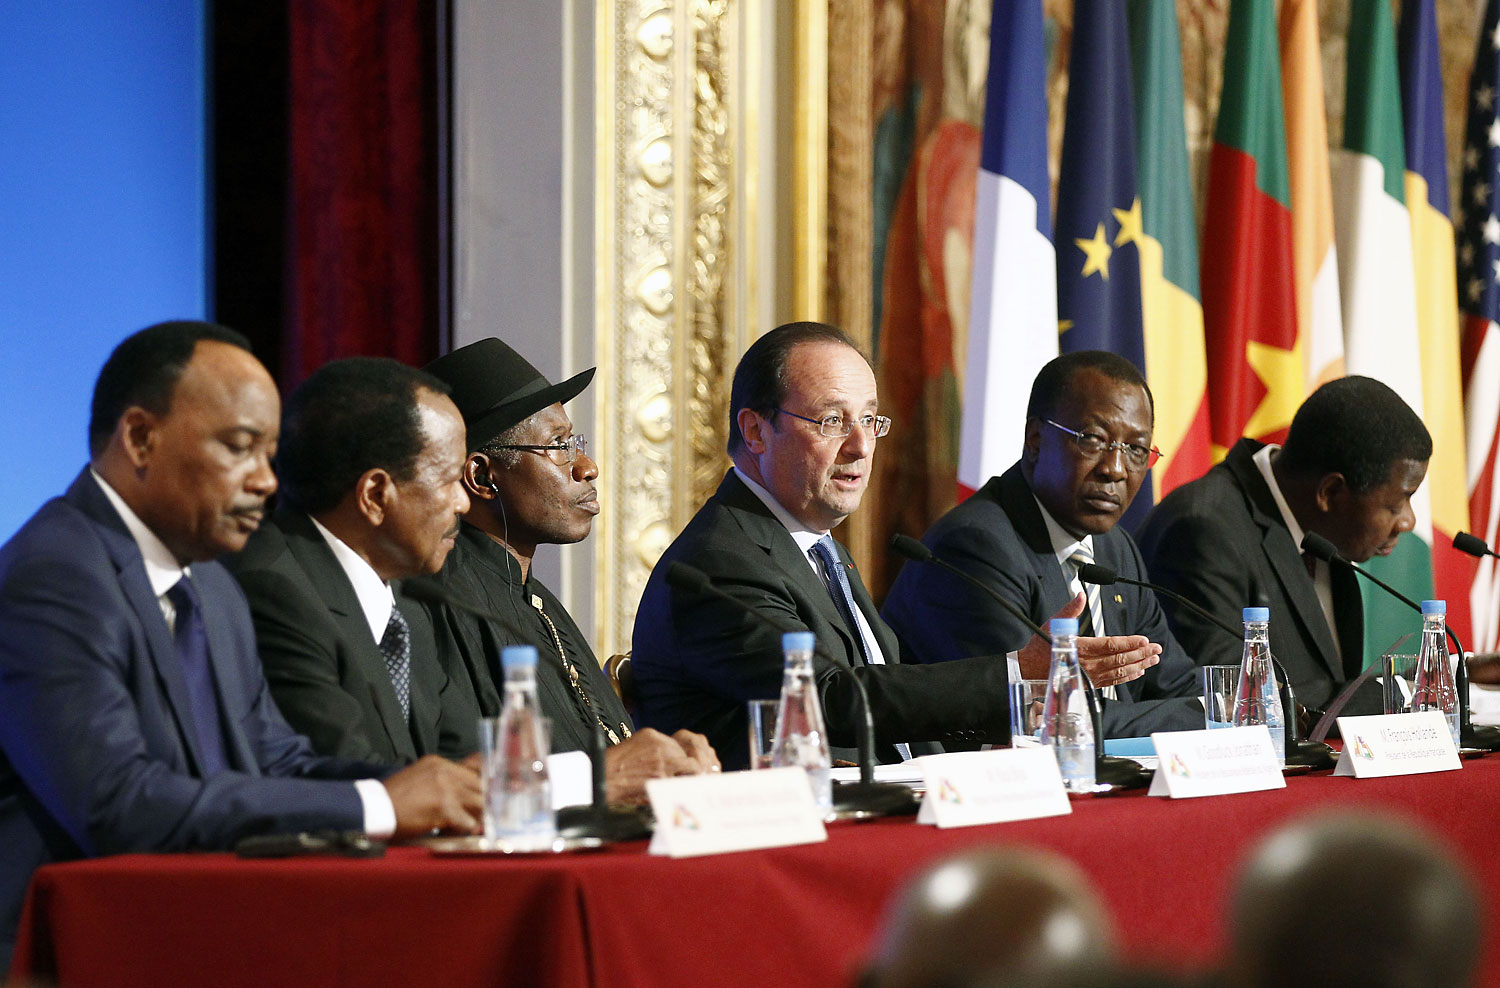 From left: Niger's President Mahamadou Issoufou, Cameroon's President Paul Biya, Nigeria's President Goodluck Jonathan, French President Fran&ccedil;ois Hollande, Chad's President Idriss D&eacute;by and Benin's President Thomas Boni Yayi attend a  joint press conference at the &Eacute;lys&eacute;e Palace in Paris on May 17, 2014 (Thierry Chesnot—Getty Images)